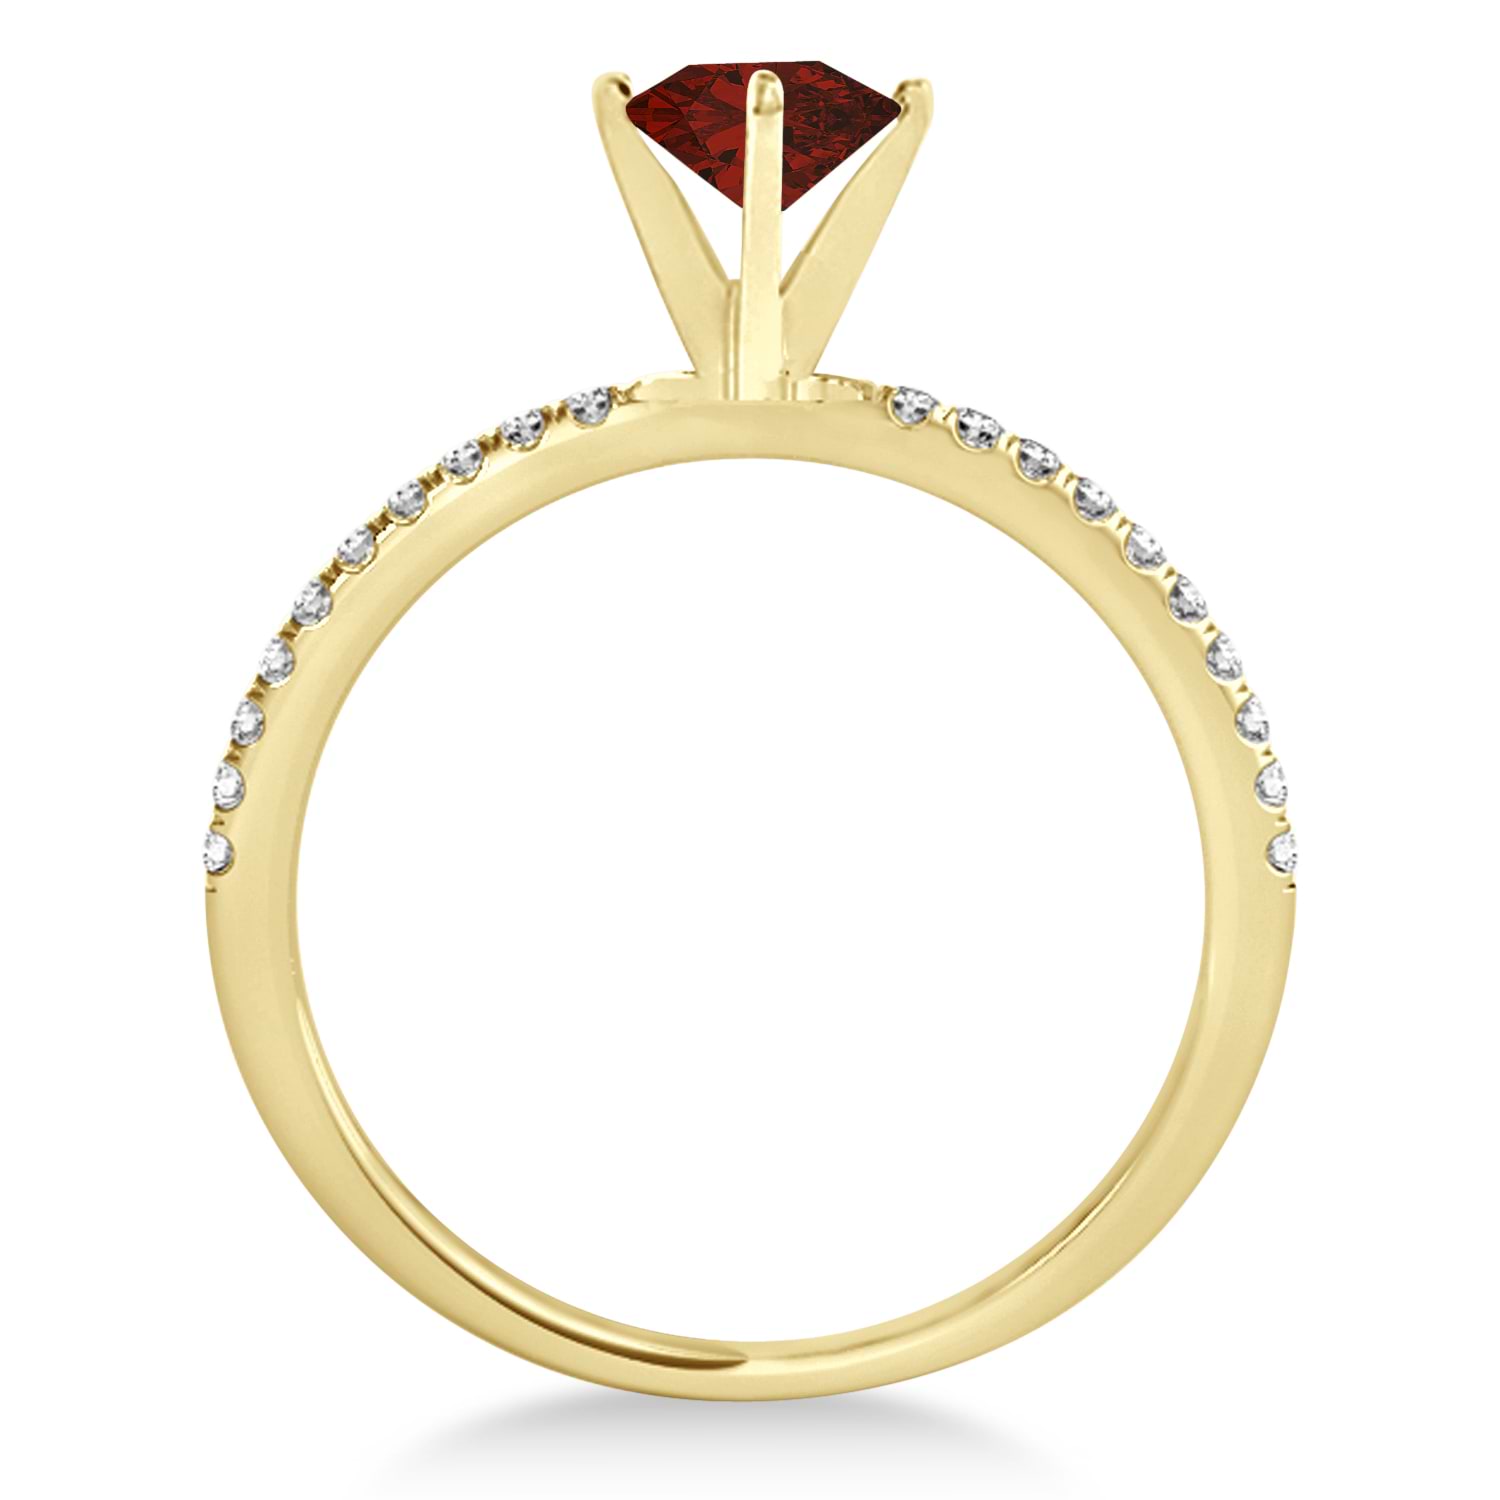 Garnet & Diamond Accented Oval Shape Engagement Ring 18k Yellow Gold (1.00ct)